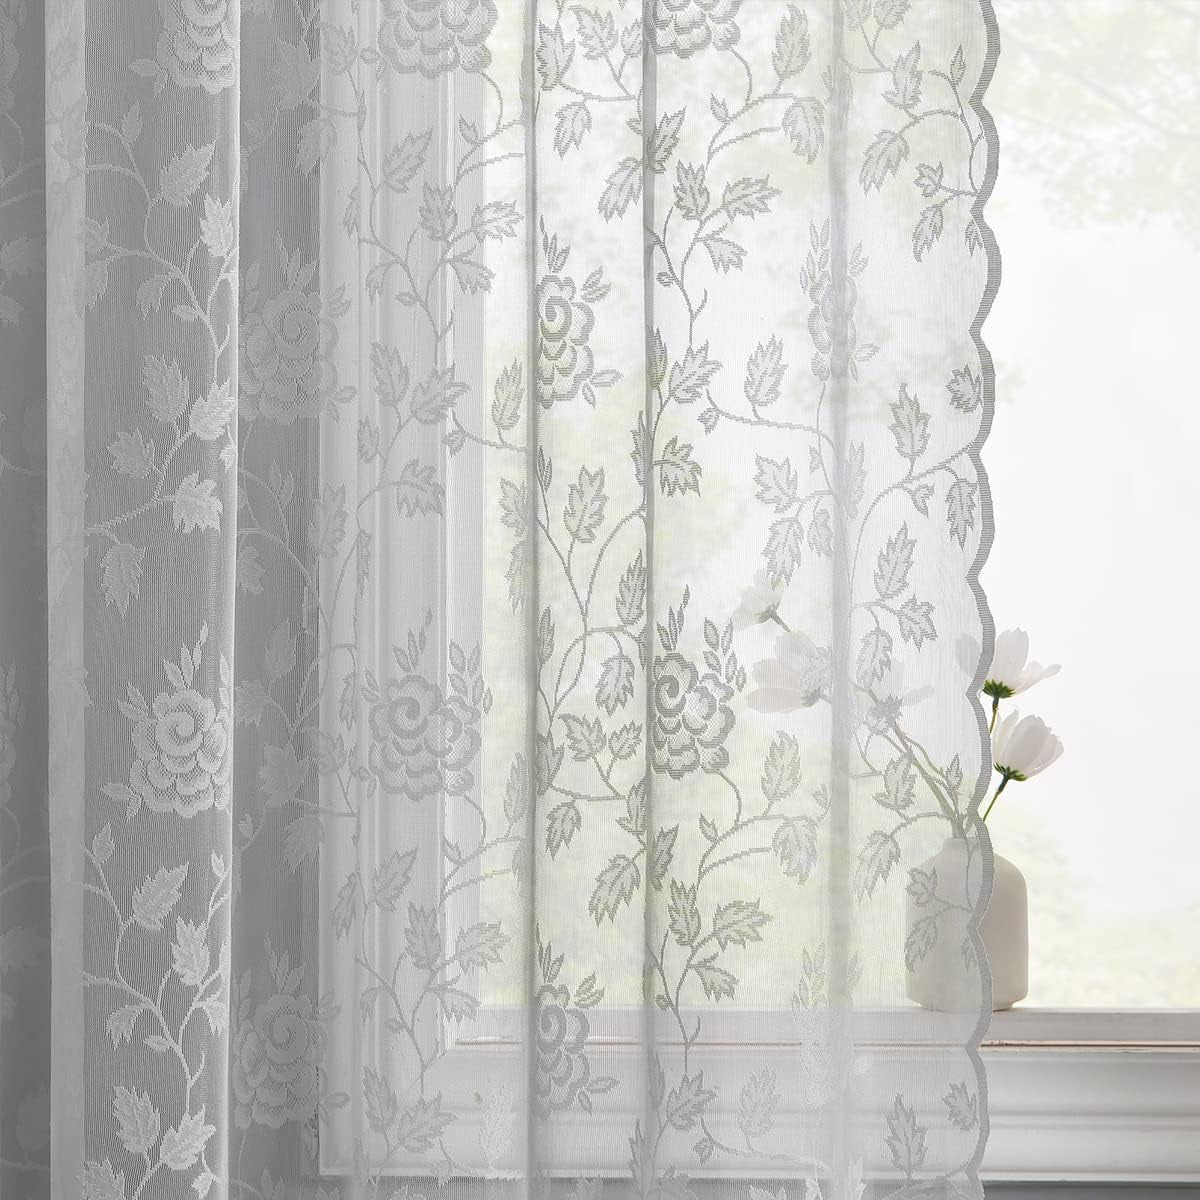 TERLYTEX White Lace Curtains 84 Inches Long, Country Vine Floral Embroidered Sheer Lace Curtains for Living Room, Privacy Scalloped Lace Sheer Curtains for Windows, 52 X 84 Inch, 2 Panels, White  TERLYTEX Grey W52 X L84 Inch|Pair 